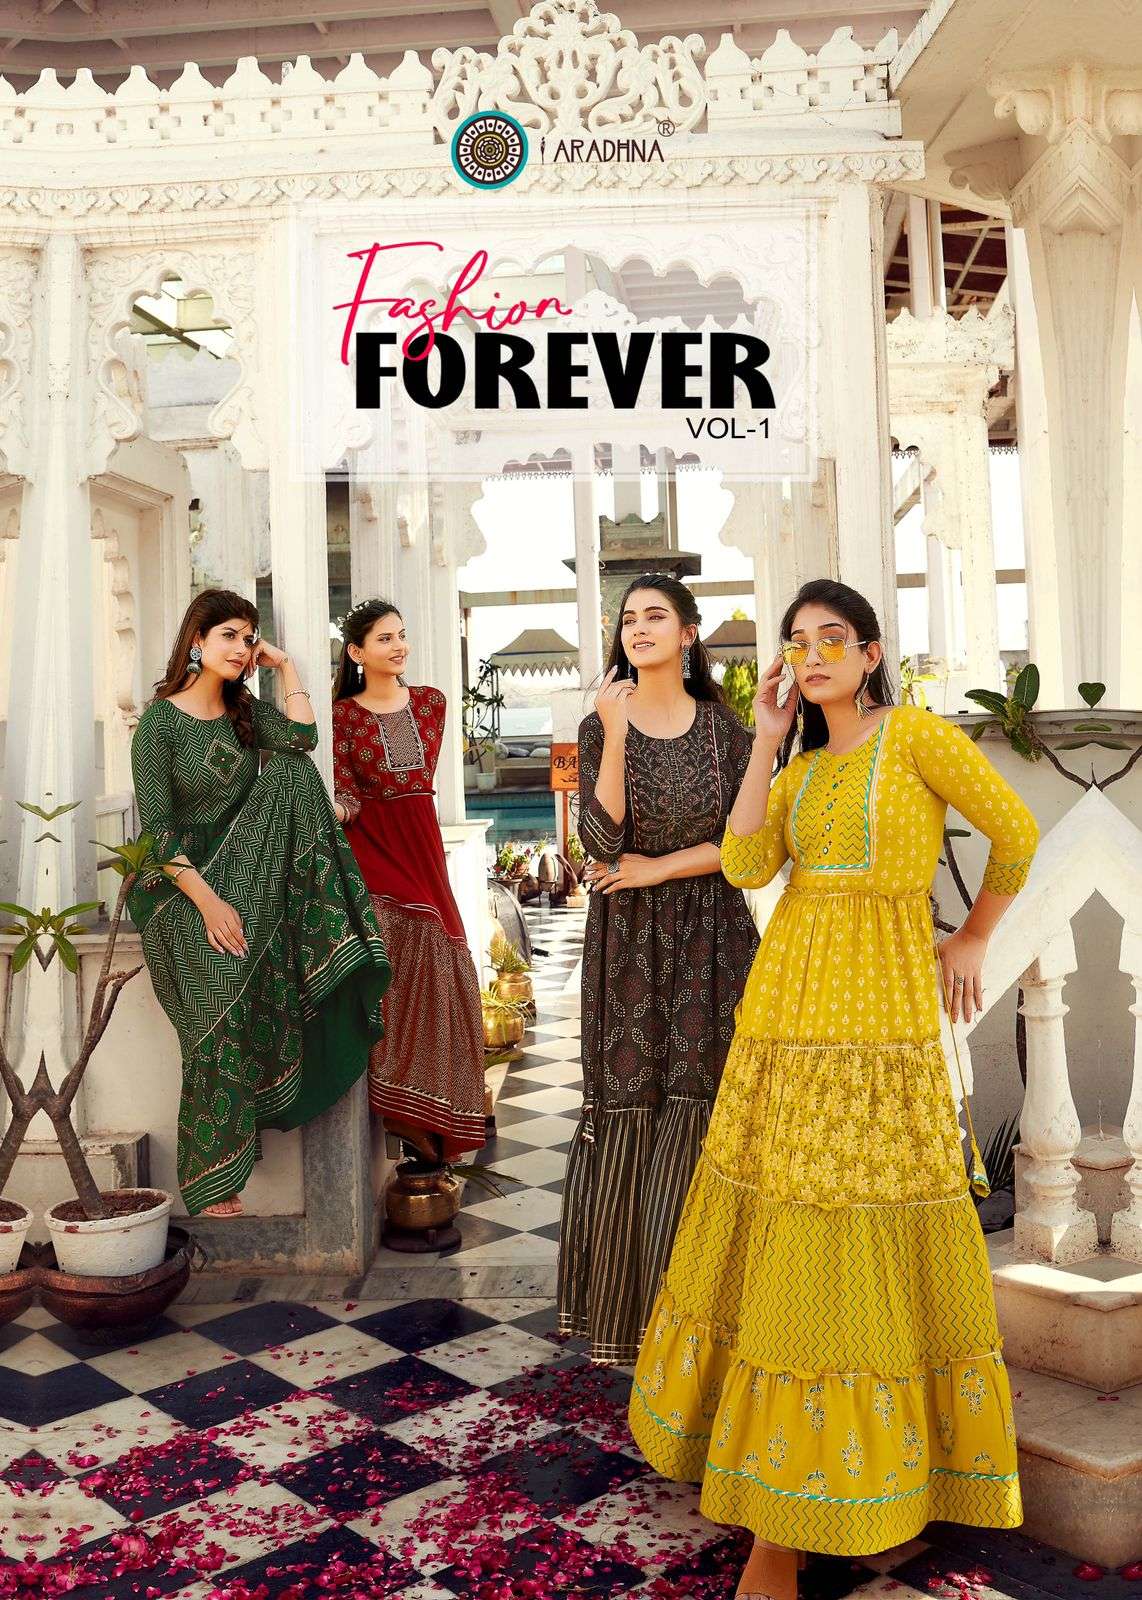 FASHION FOREVER VOL 1 BY ARADHNA PRESENTING NEW HEAVY FANCY DESIGNER RAYON FLAIR KURTI REGULAR WEAR COLLECTION WHOLESALER